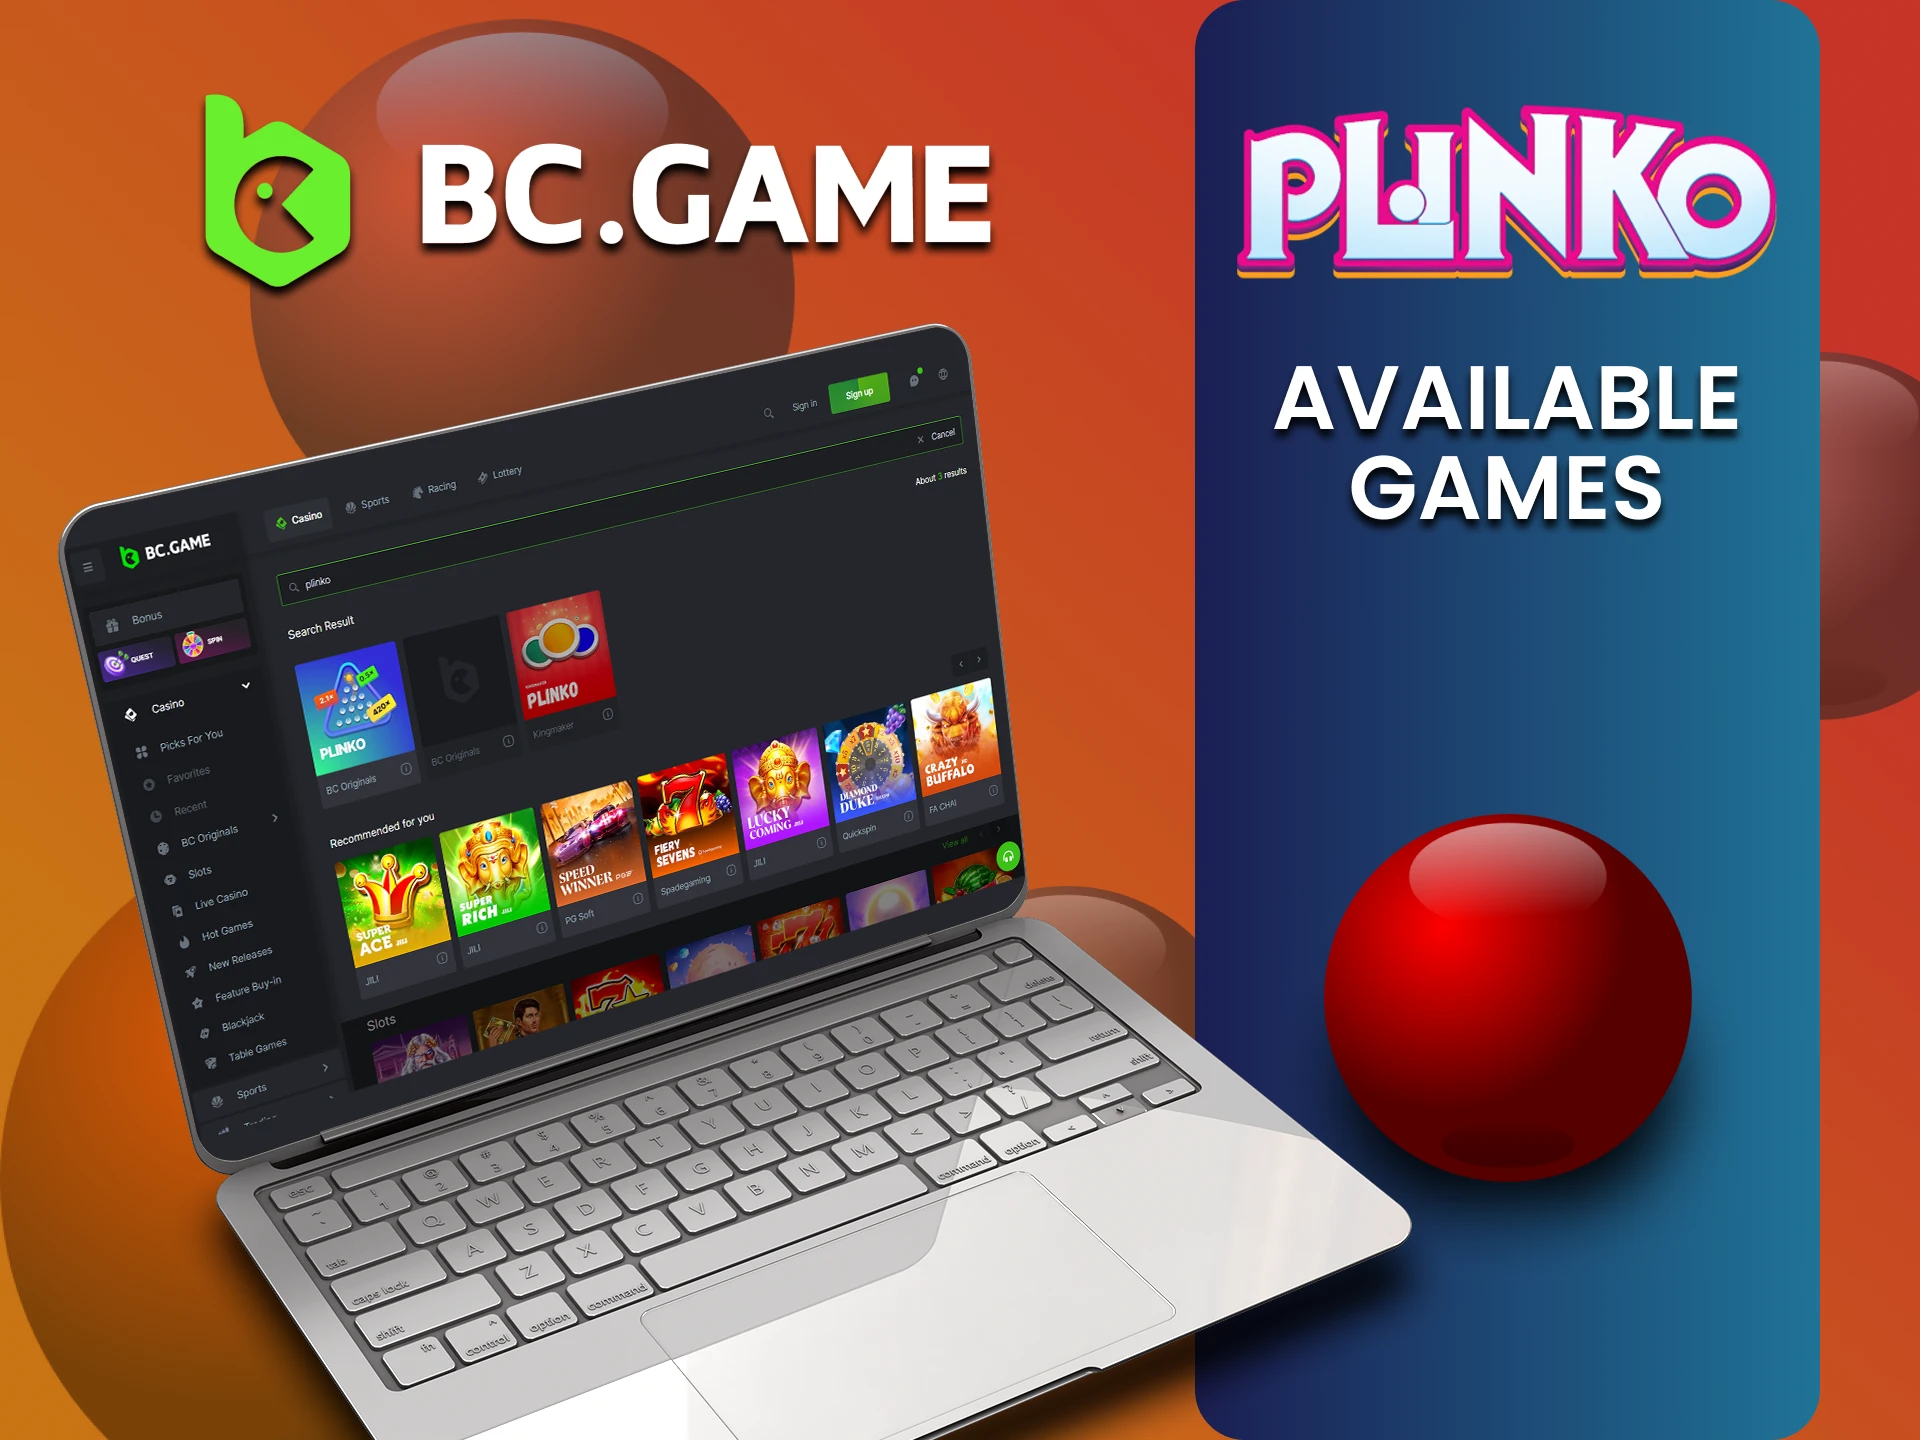 We will provide a list of Plinko games on the BCGame website.